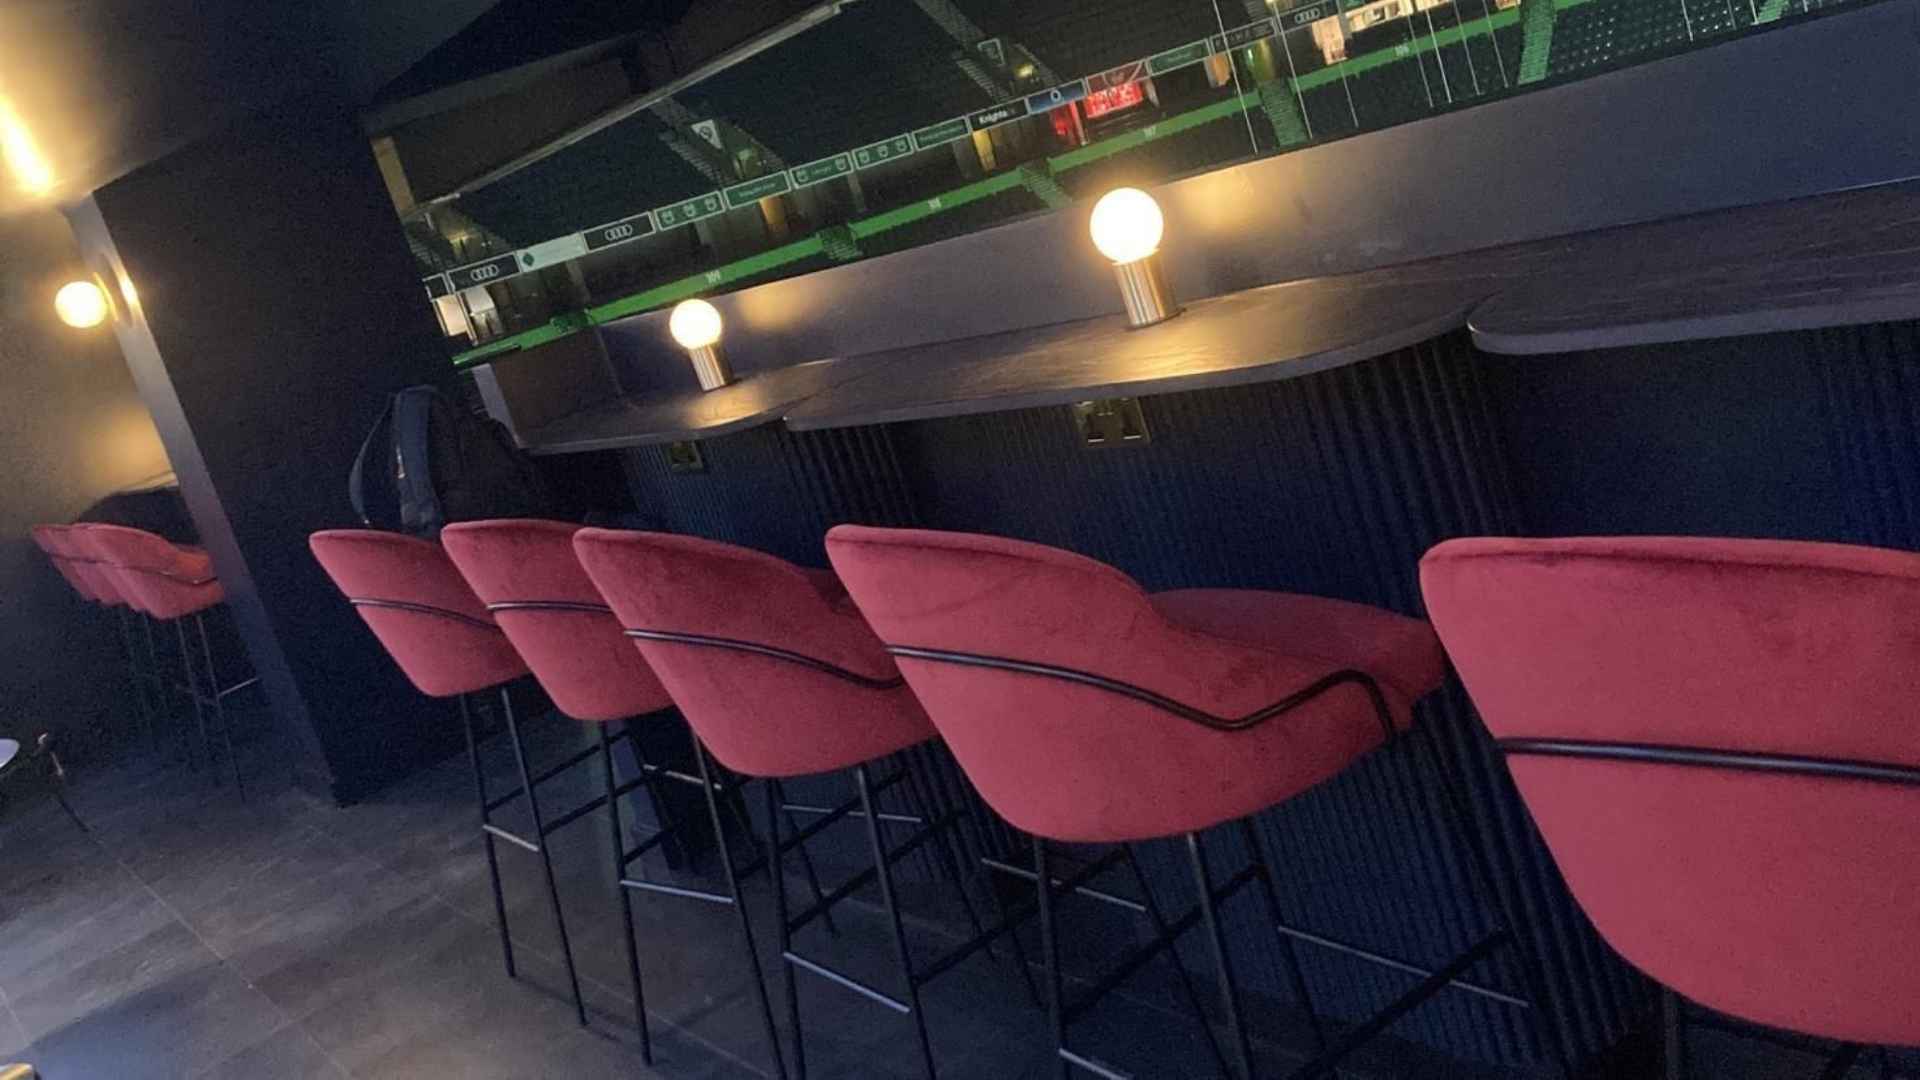 bespoke bar seats in the executive lounge at ao arena's viewing area